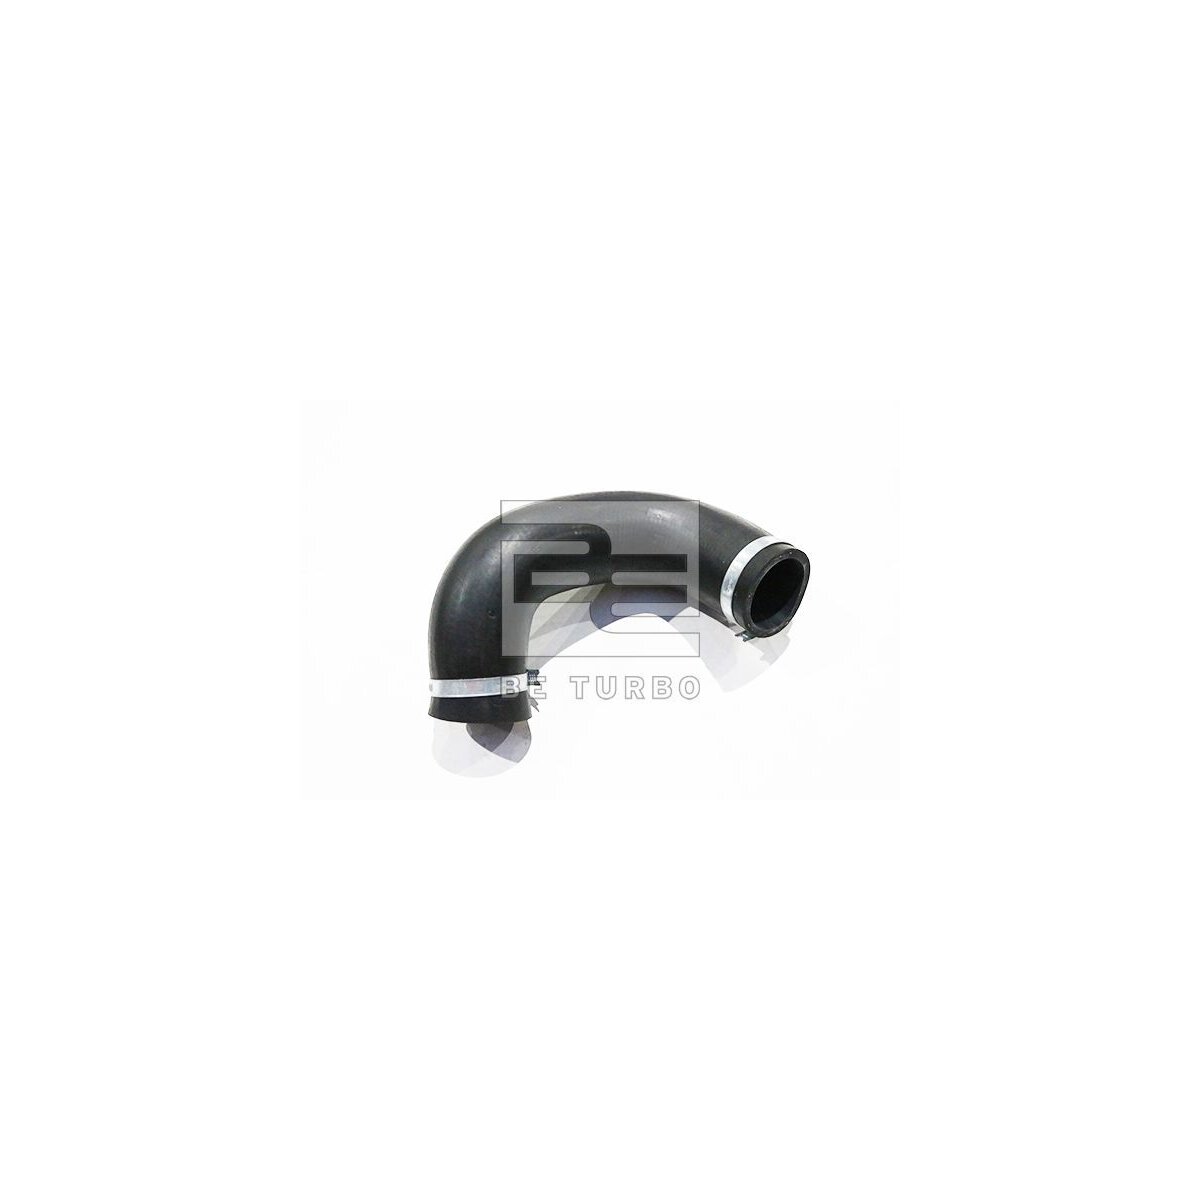 BE TURBO Ladeluftschlauch 700402, 56.134,99 €